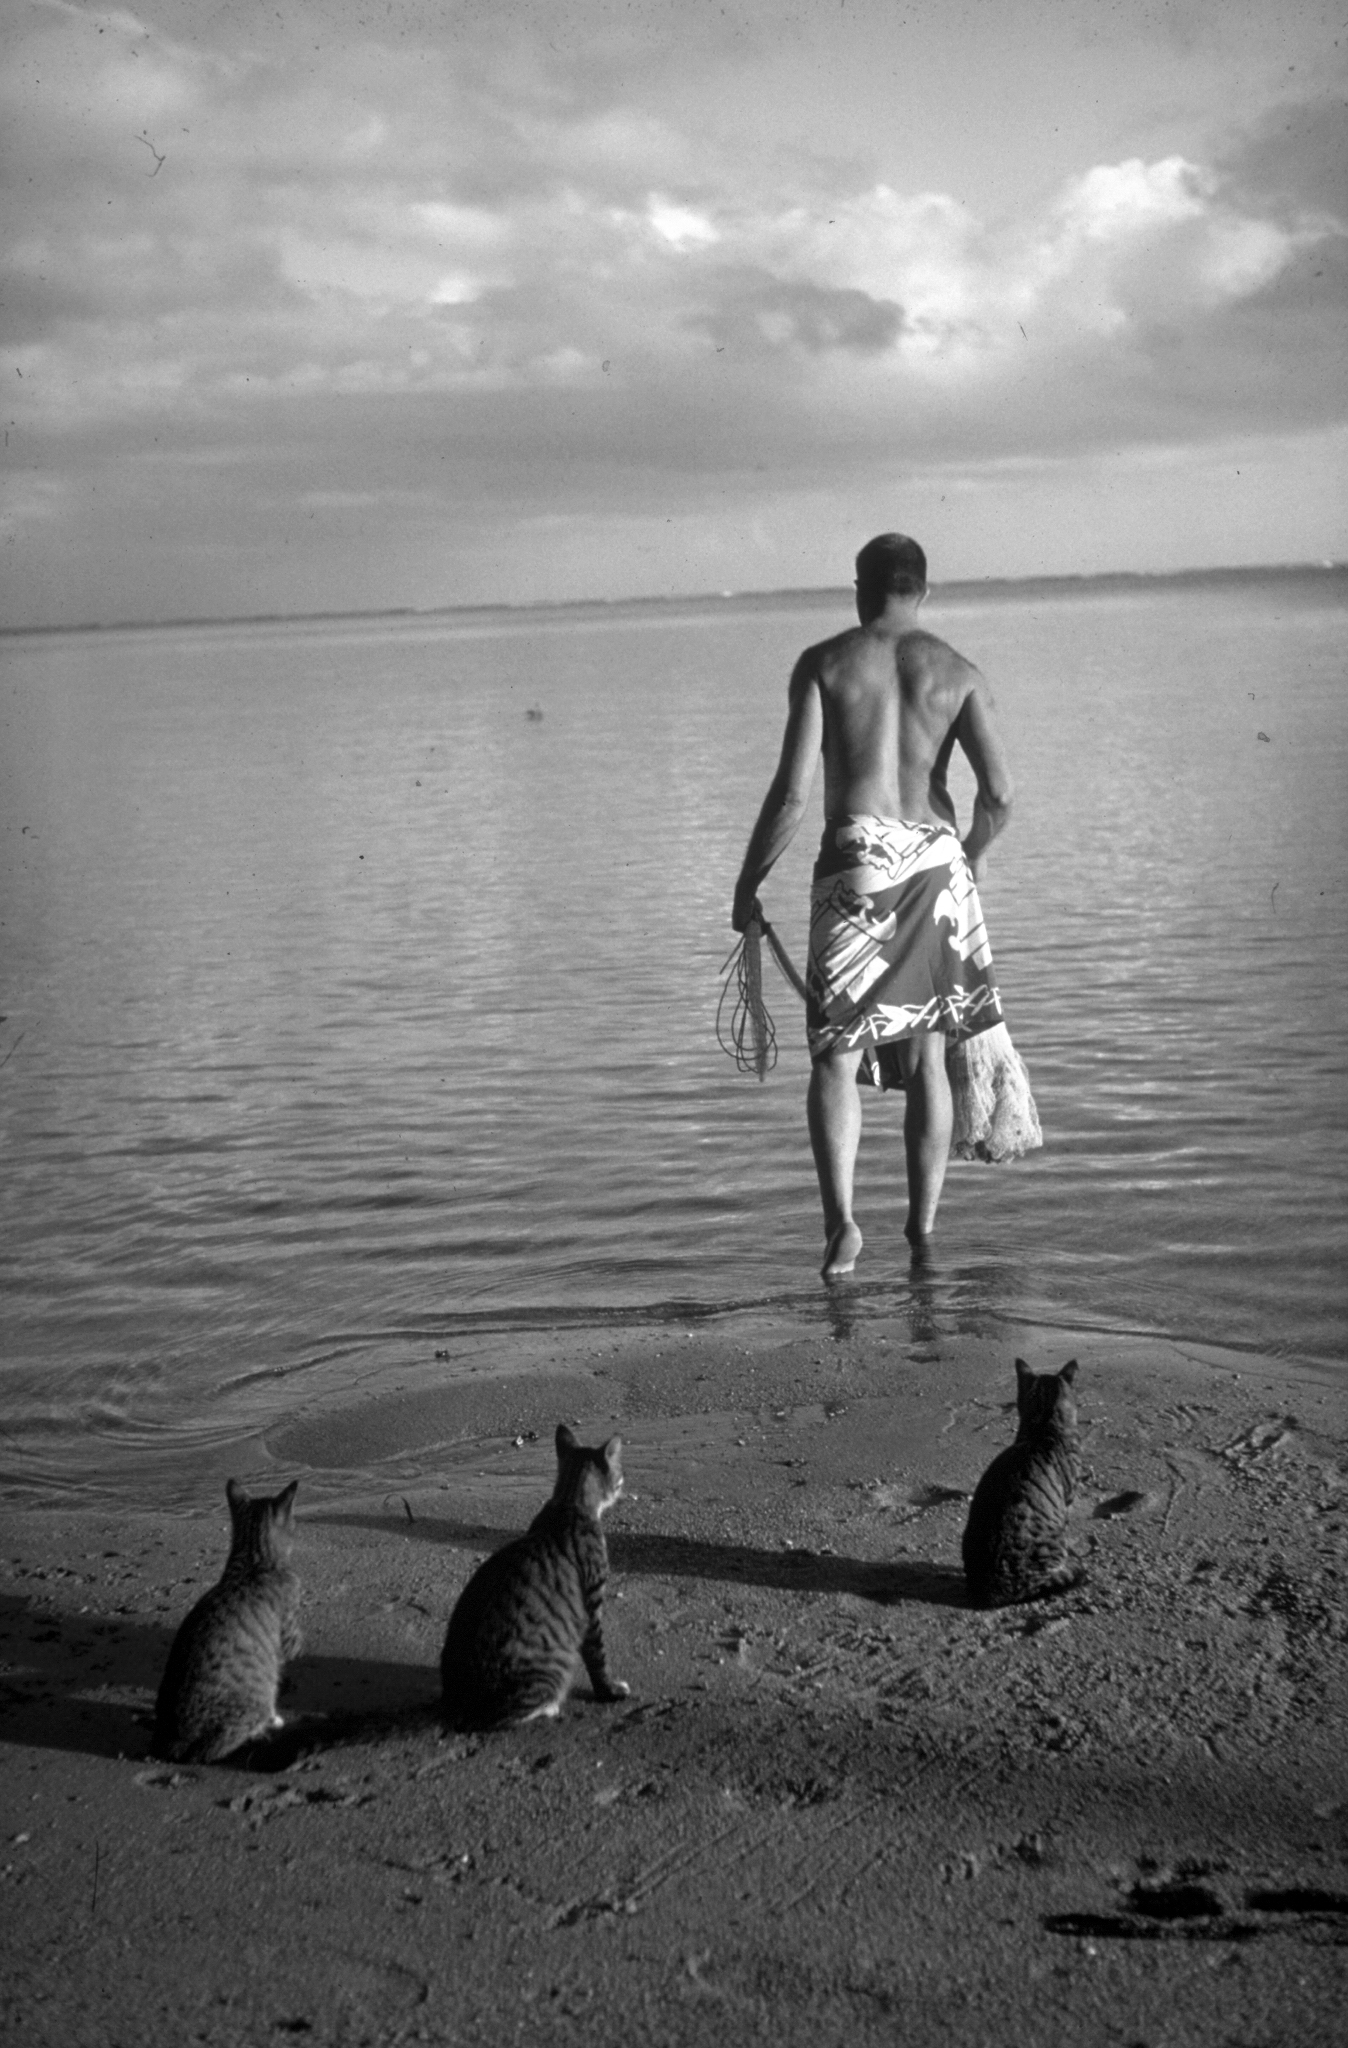 Ordinary striped tabby cats waiting on beach as a man goes out into the water to catch fish, 1962.